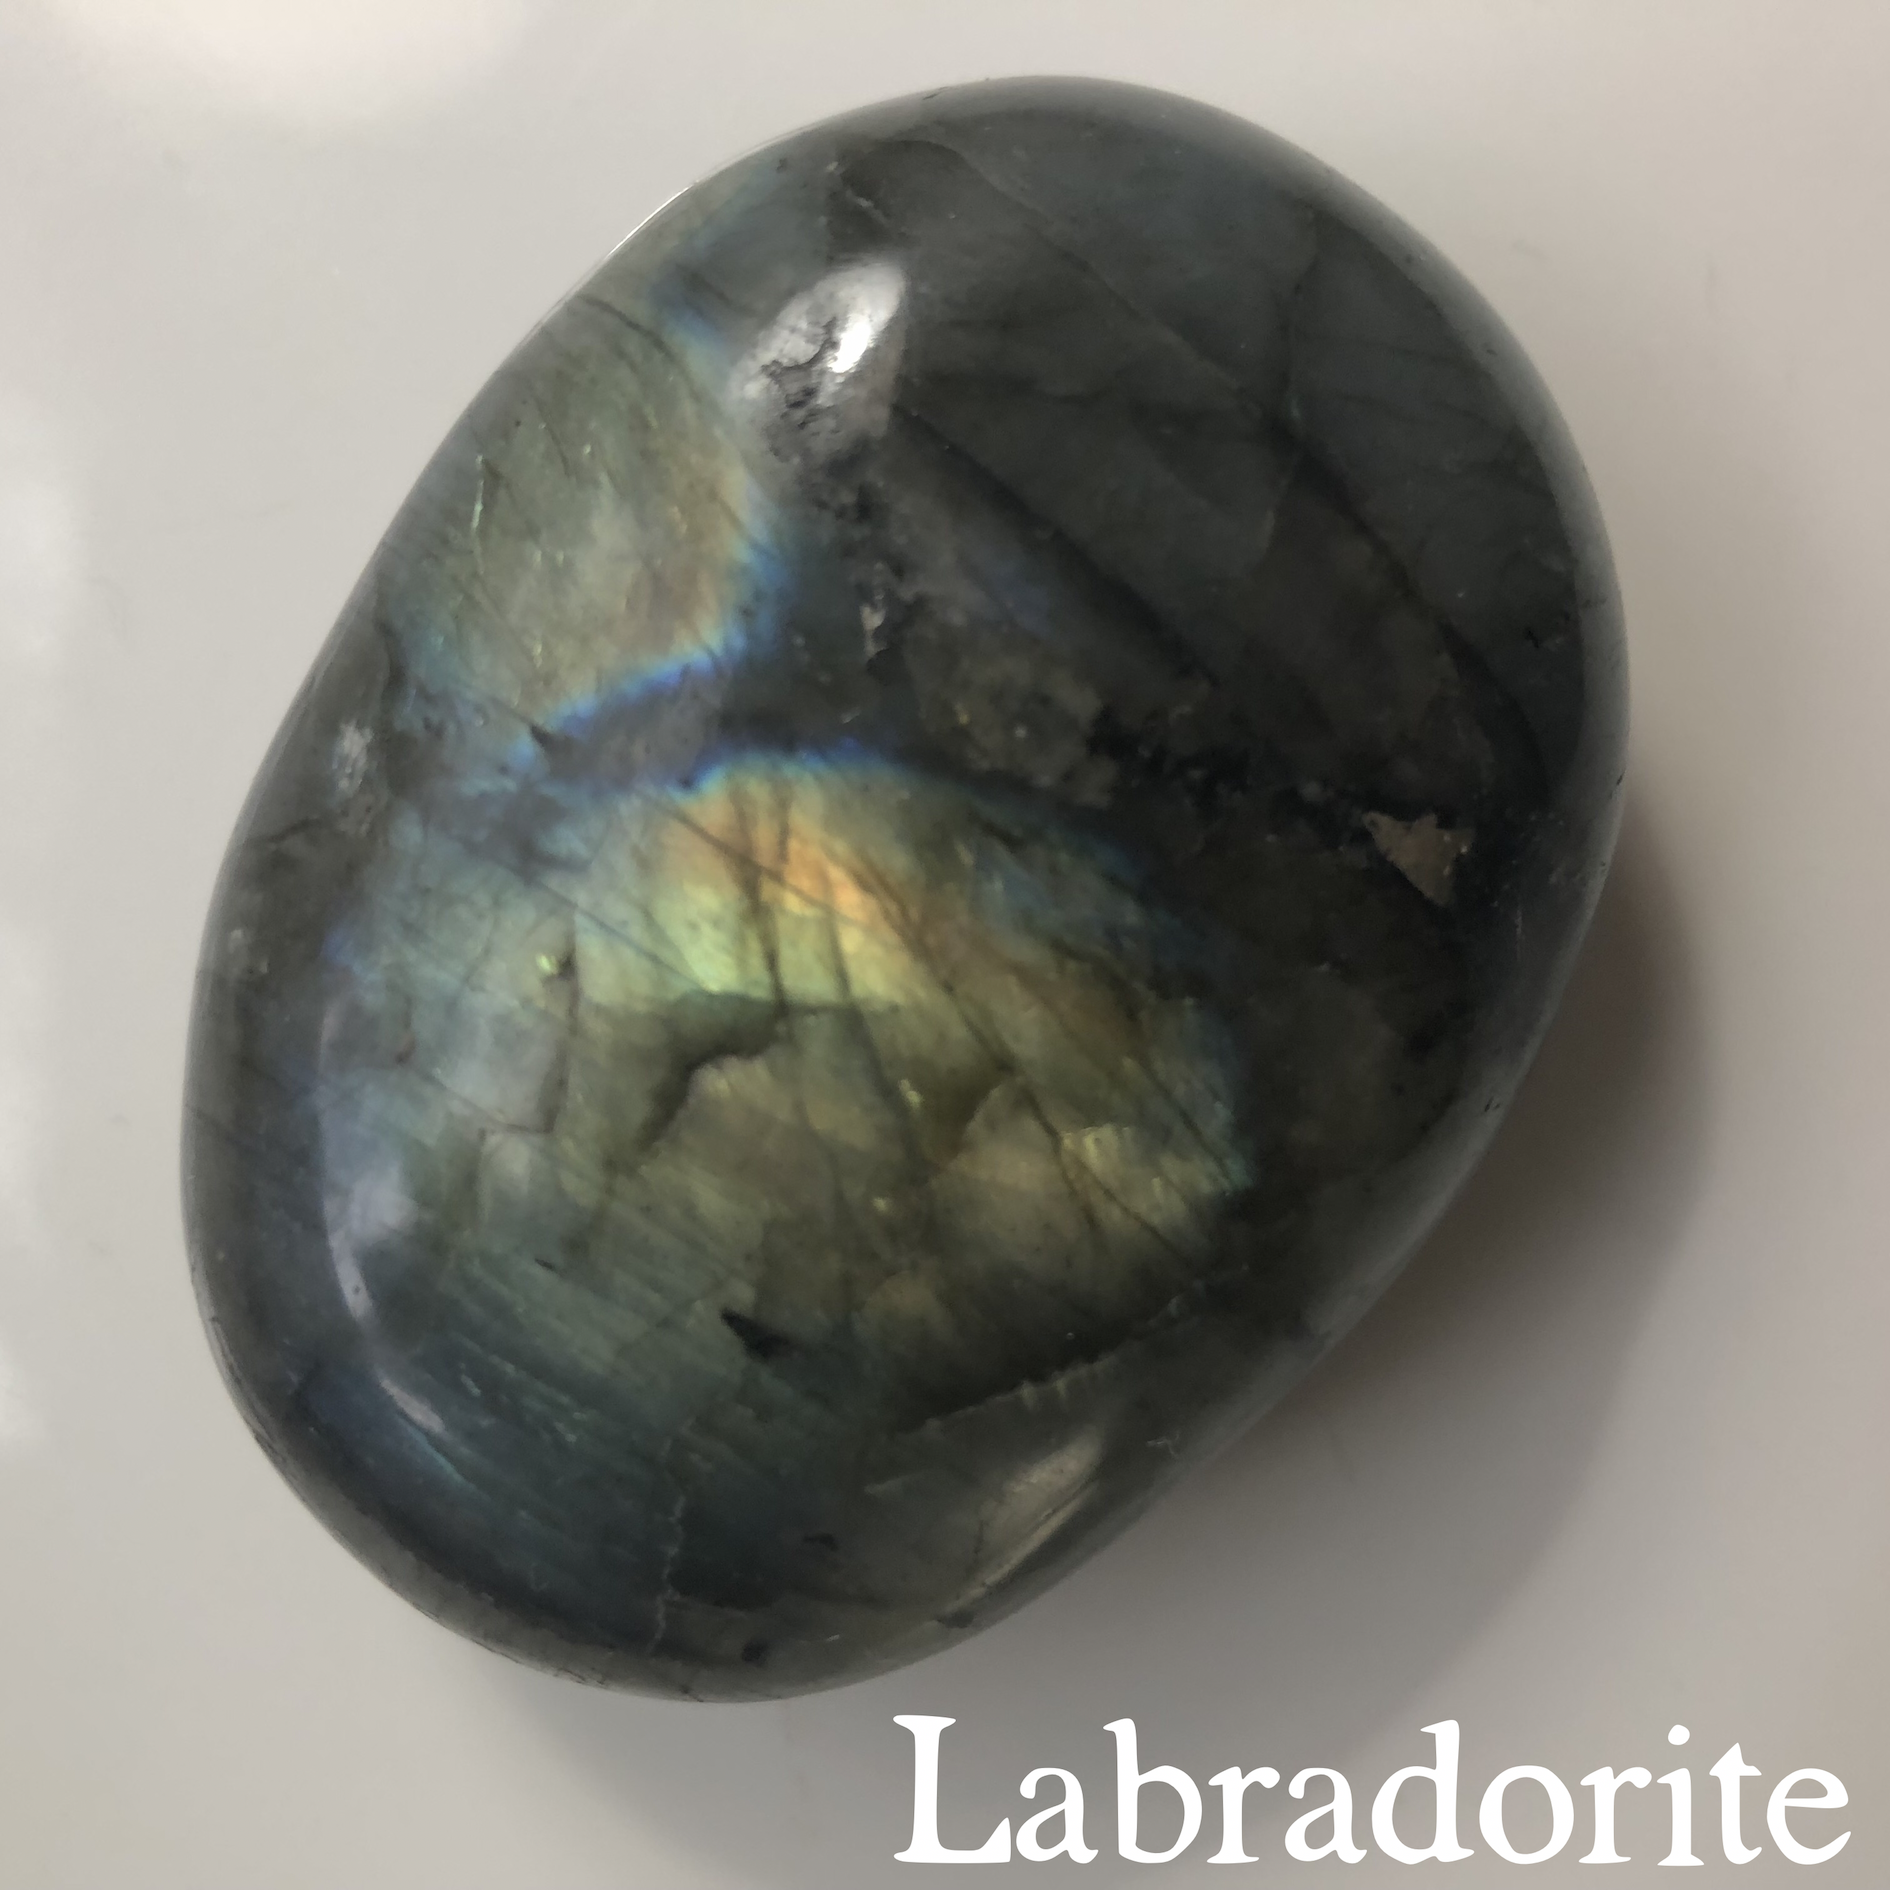   Labradorite ($9.00) :&nbsp; This guy is fly.&nbsp; According to legend, a bit of the aurora borealis was trapped in a rock, and labradorite was born.&nbsp; The little paper I was given with my purchase (helpful—that way, you don’t have to take pict